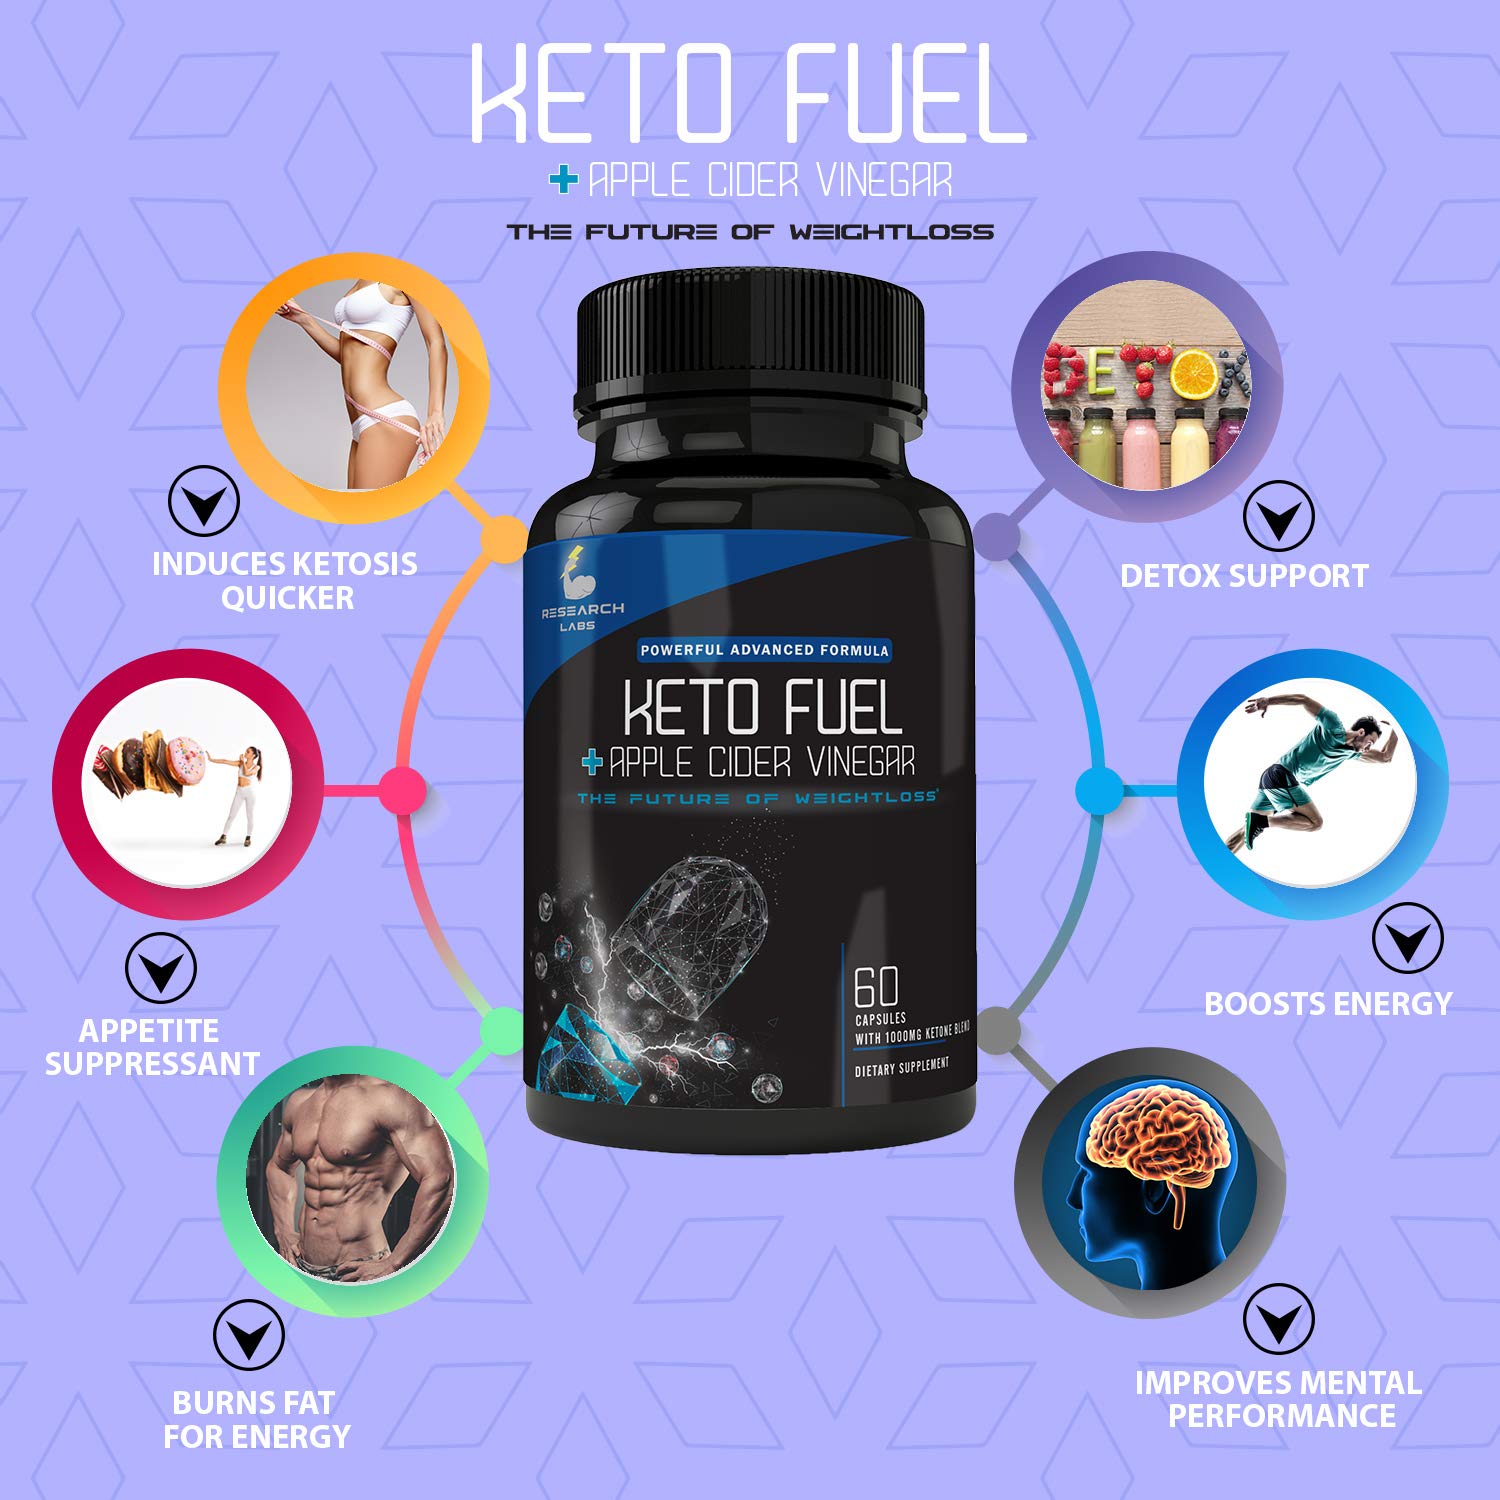 Keto Supps: Are They a Shortcut to Ketosis? Our